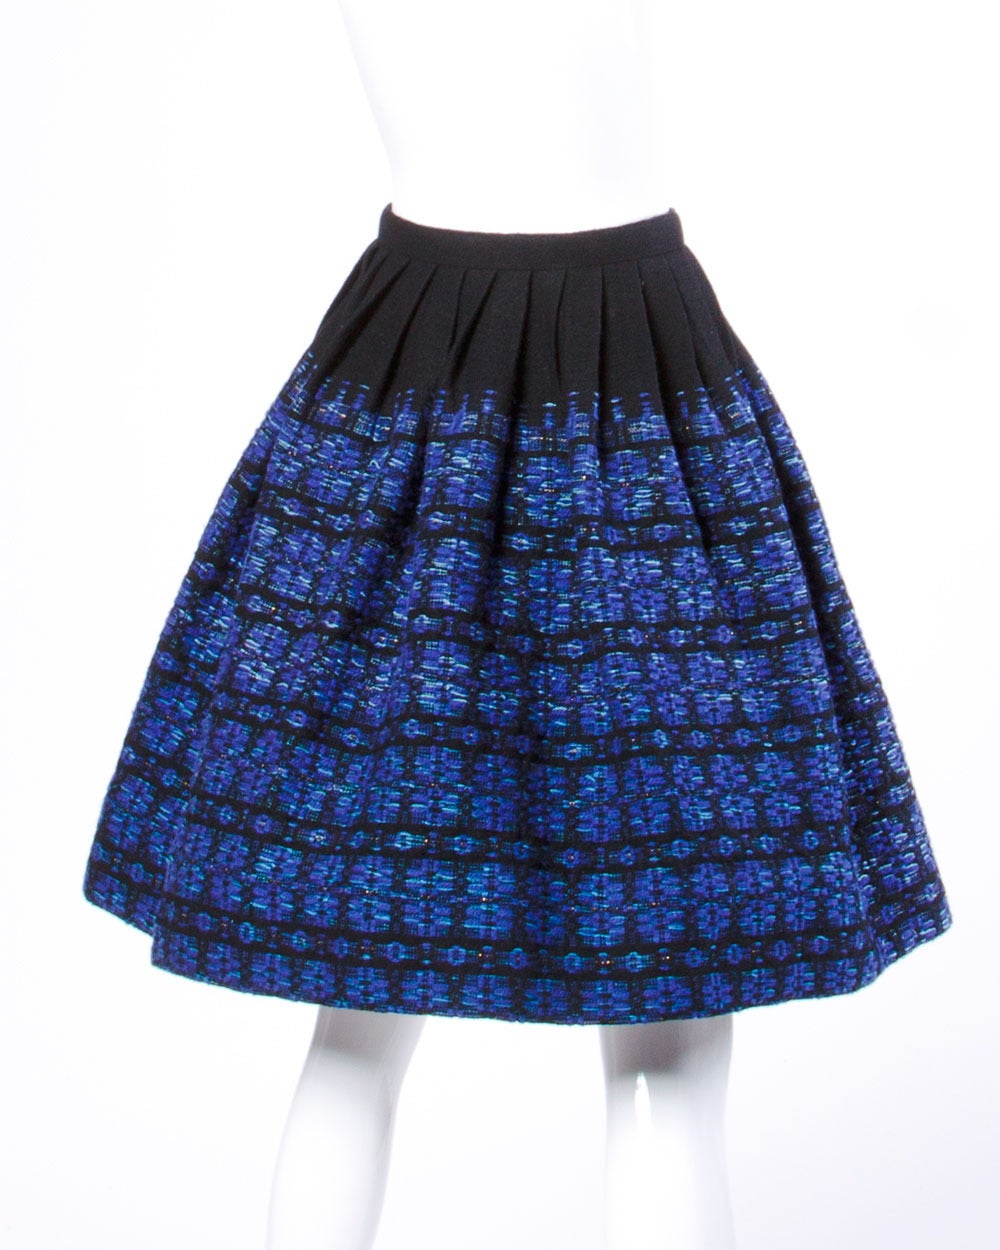 Gorgeous pleated full sweep vintage skirt in heavy woven wool fabric.

Details:

Unlined
Side Hook Closure
Estimated Size: S-M
Color: Black/ Blue/ Turquoise

Measurements:

Waist: 26